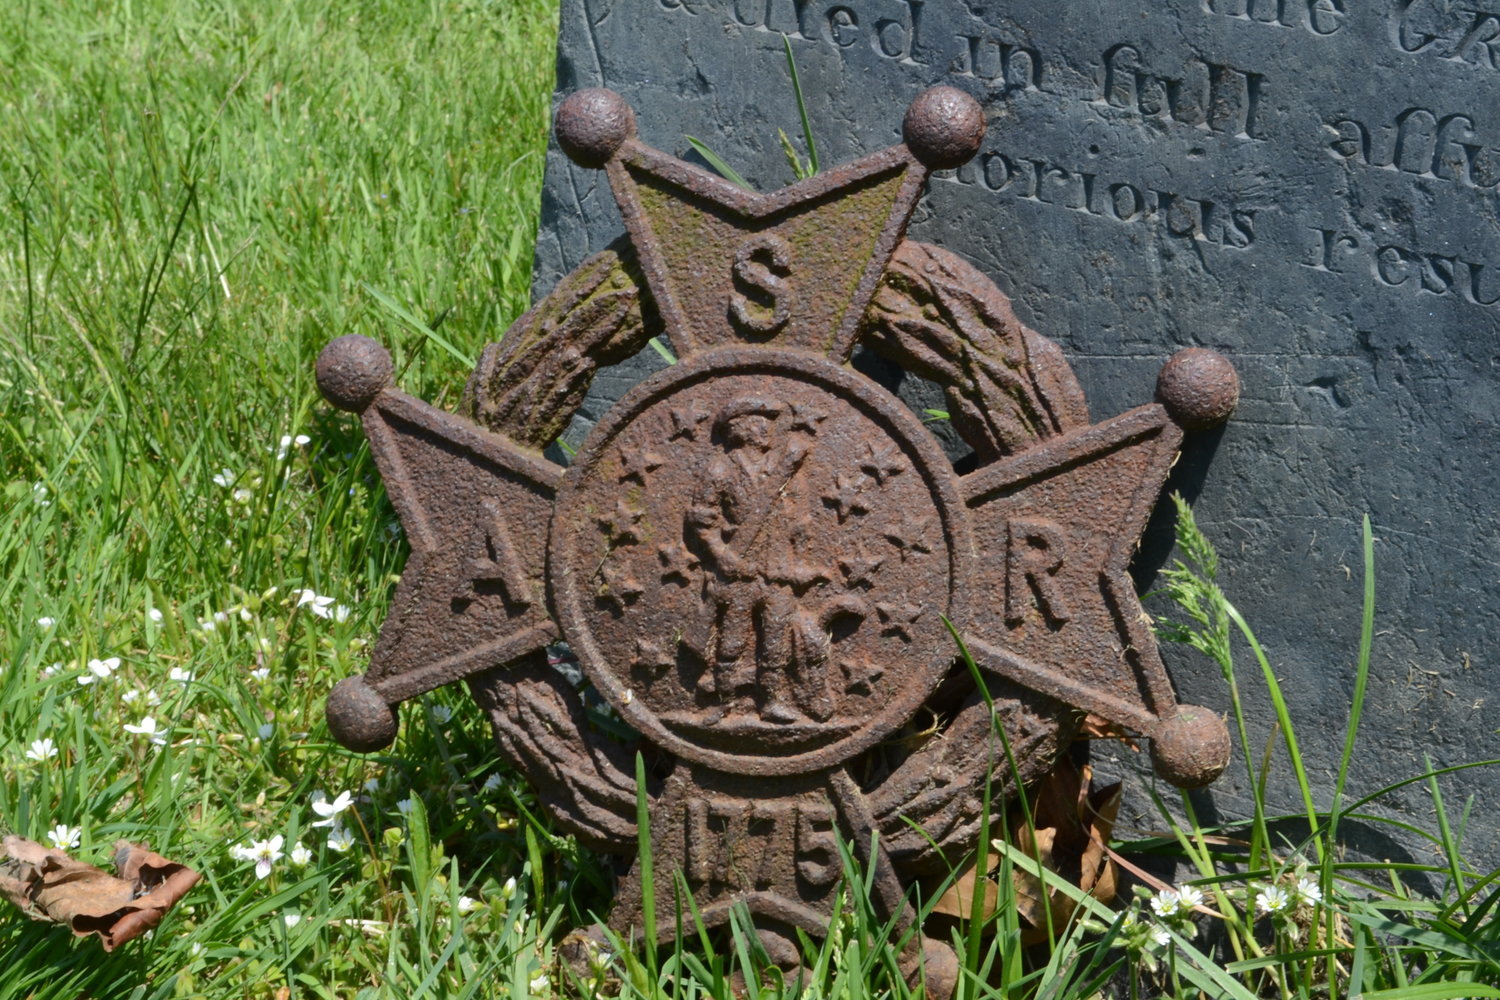 Gravestones marked as burial sites of Sons of the American Revolution are common throughout the nearly 40-acre cemetery. In total, there are over 3,200 buried military veterans at the North Burial Ground.